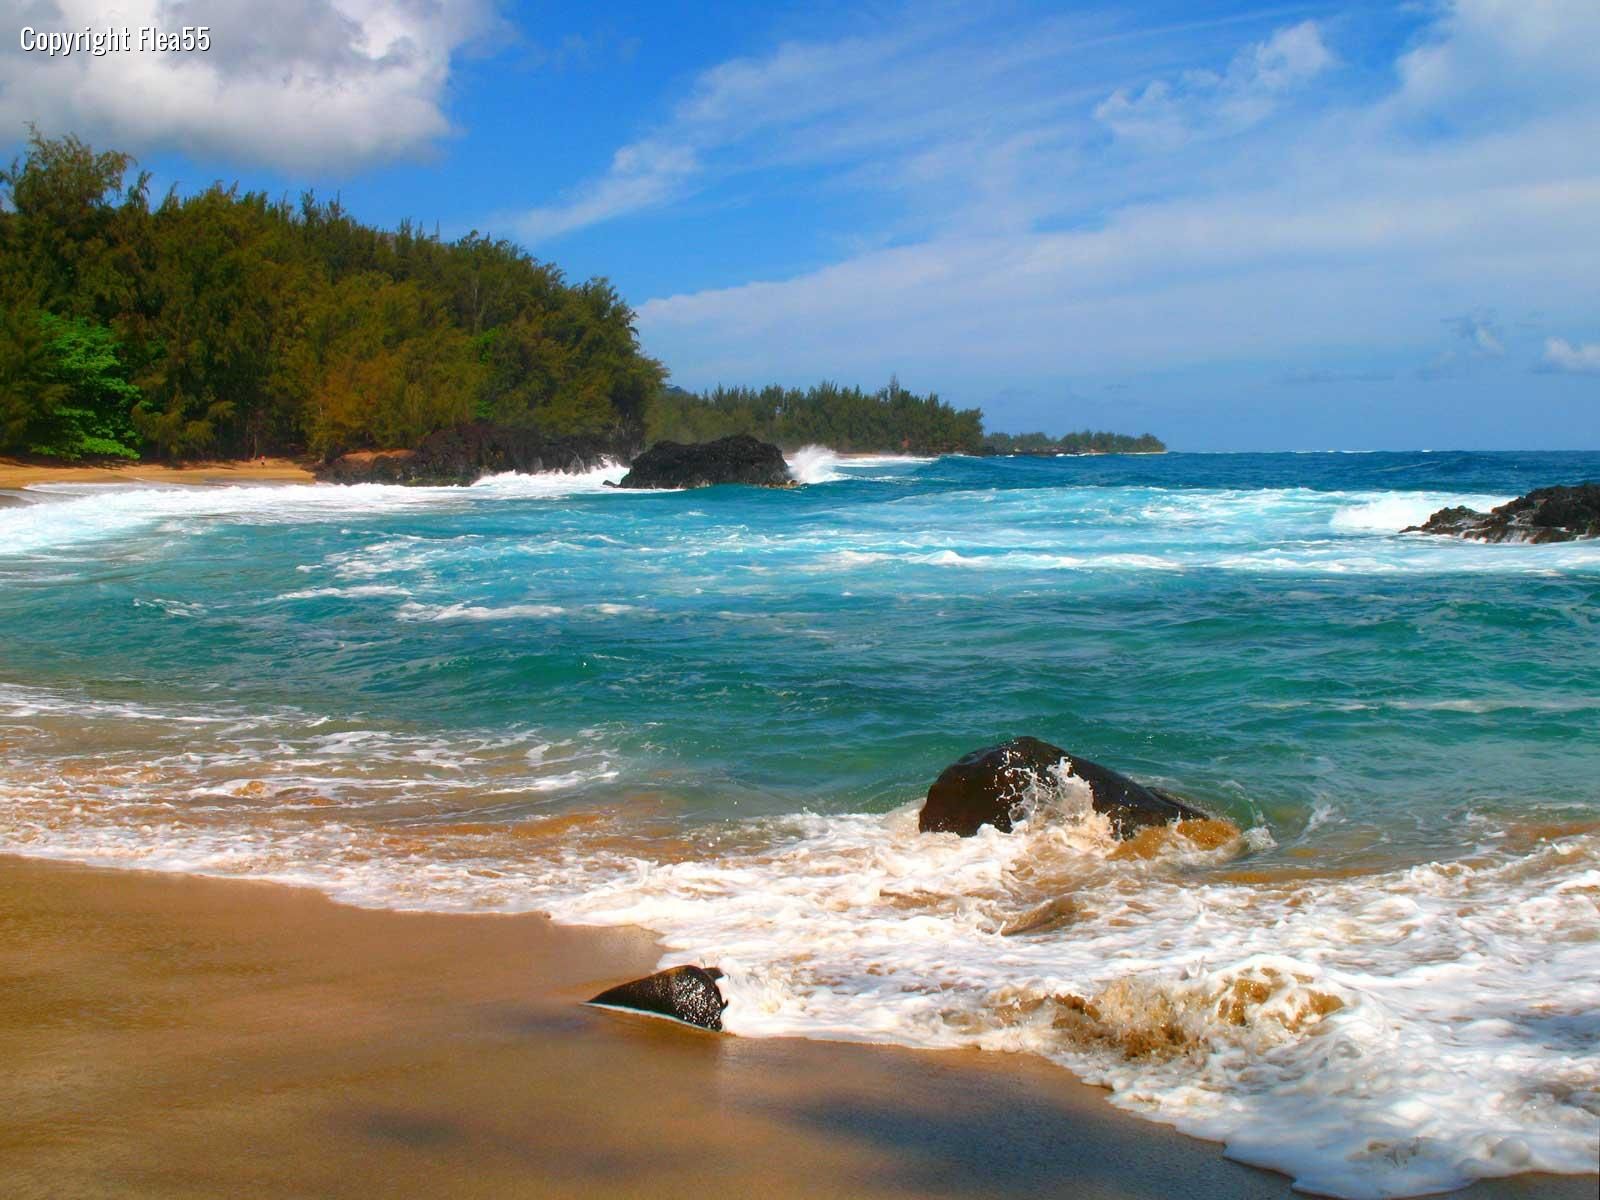 Maui Is A Diverse And Scenic Island With Immaculate Beaches